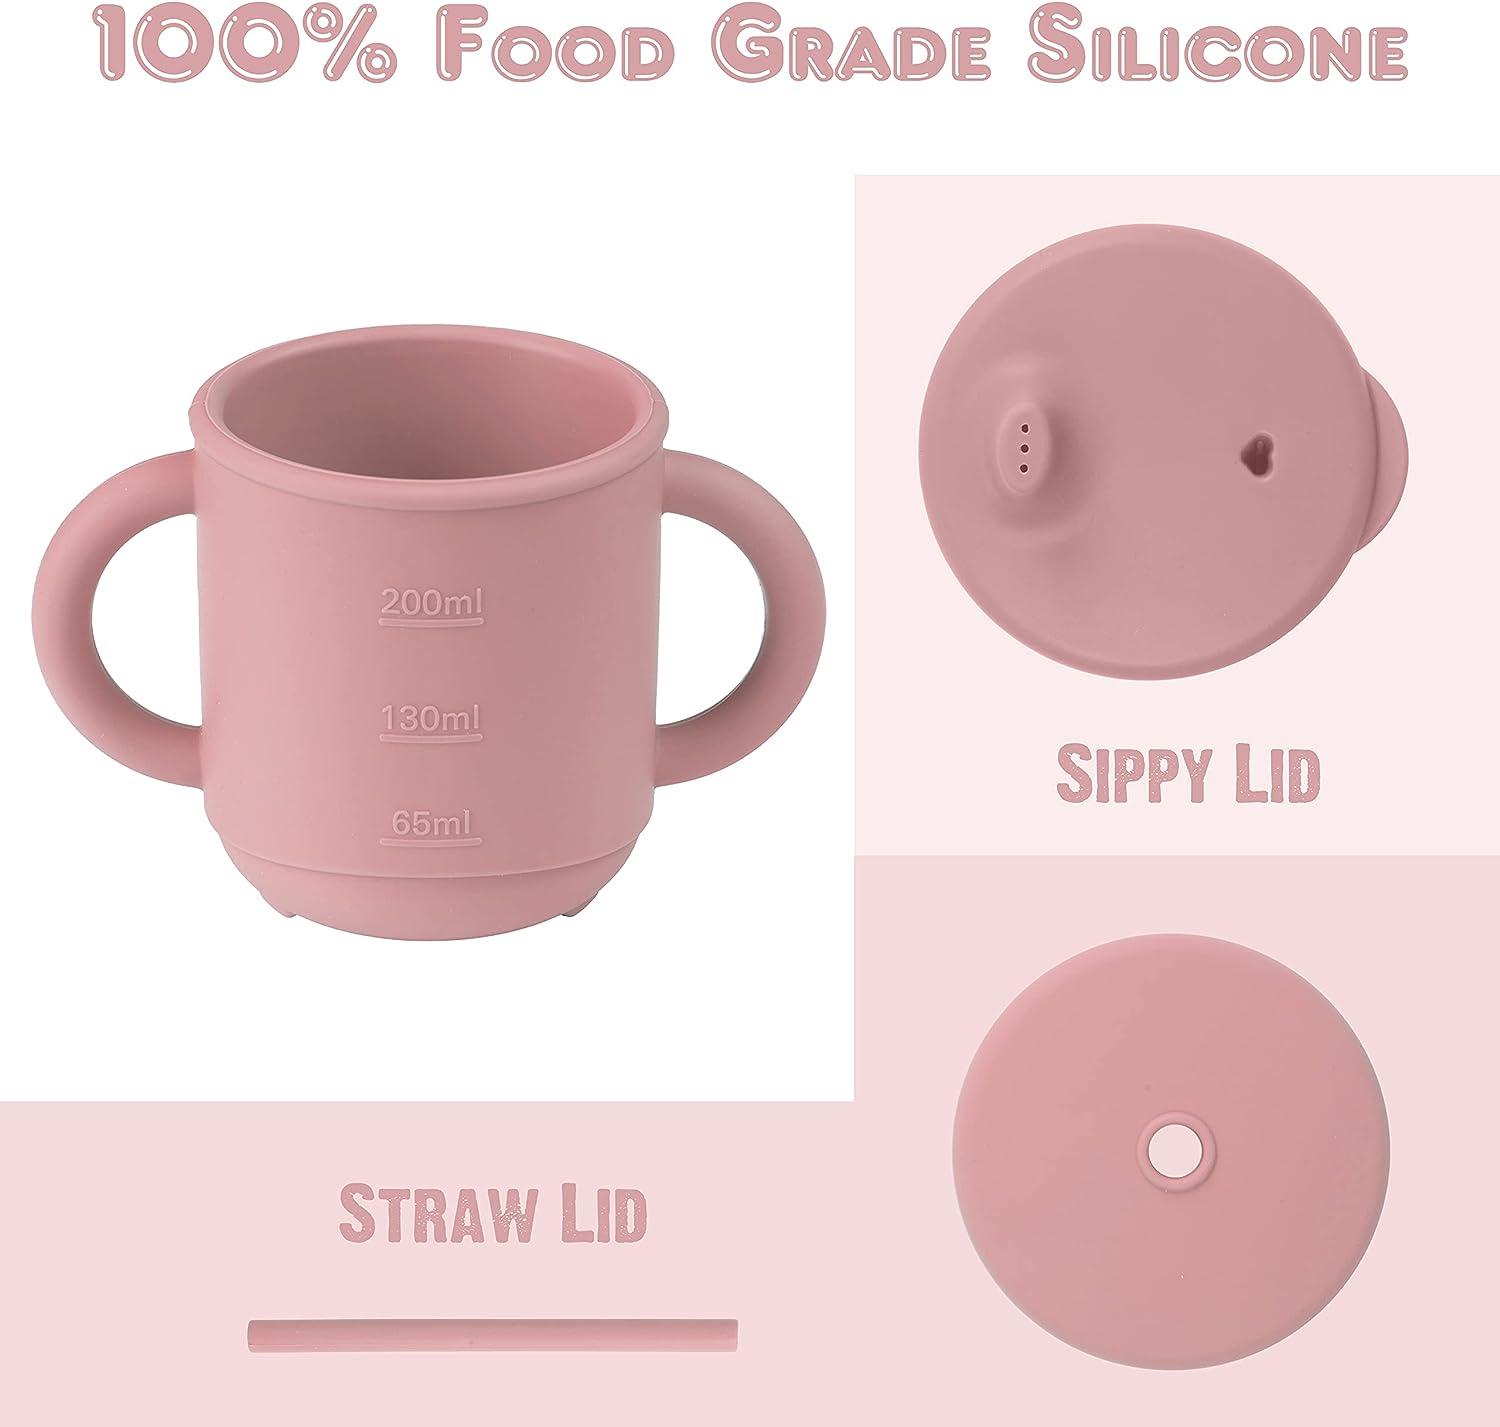 Silicone Baby Feeding Cup, Silicon Baby Drinkware